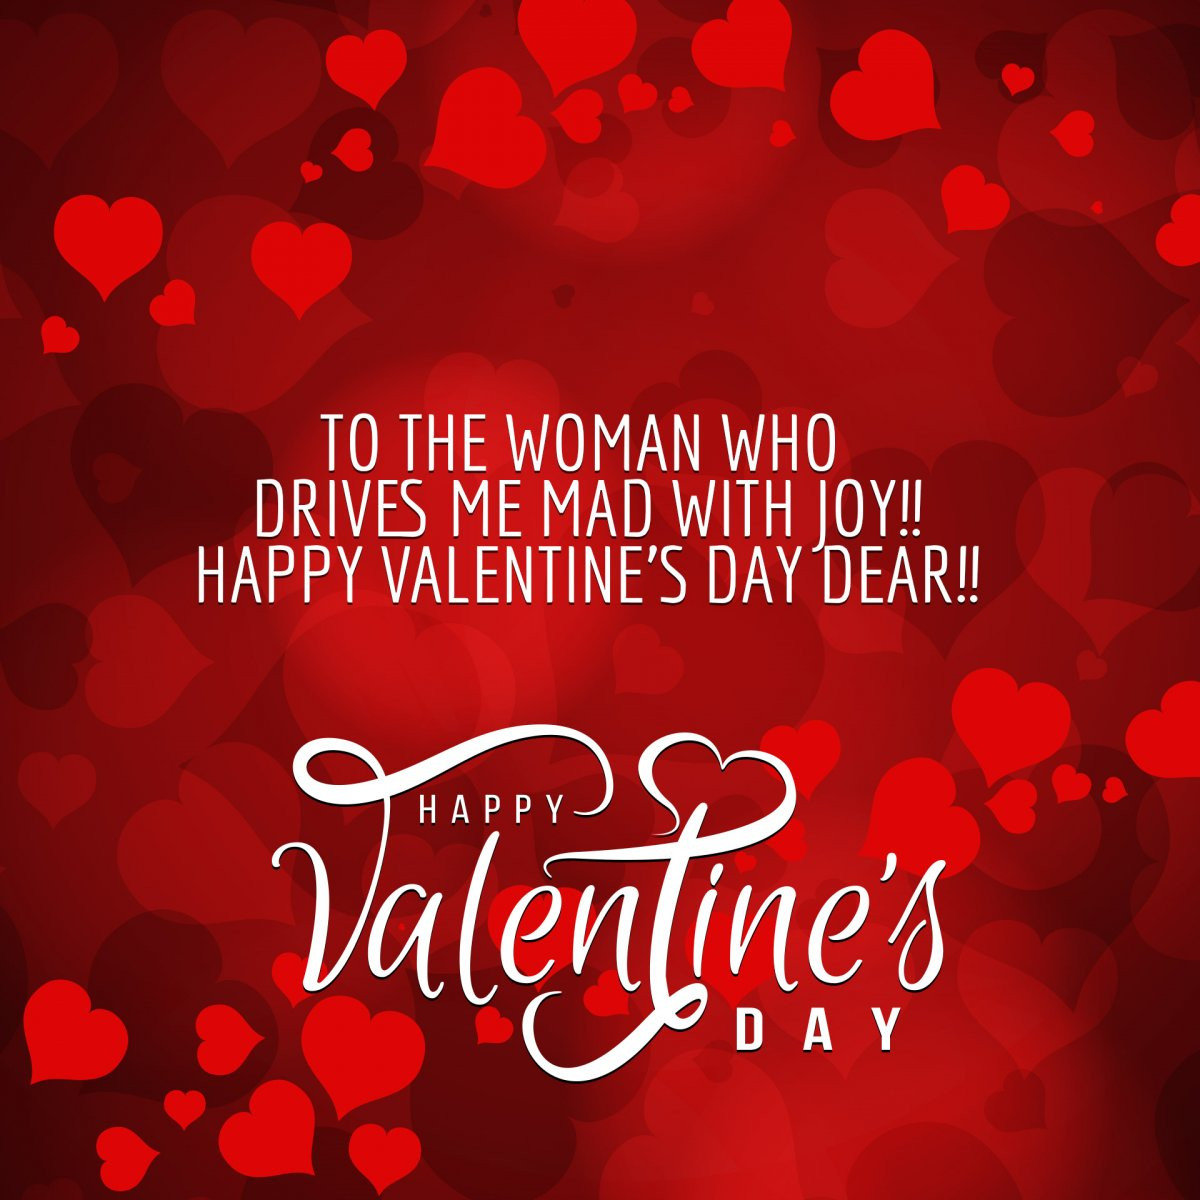 Quotes About Valentines Day
 Cute Happy Valentine’s Day 2019 Wishes Messages and Love